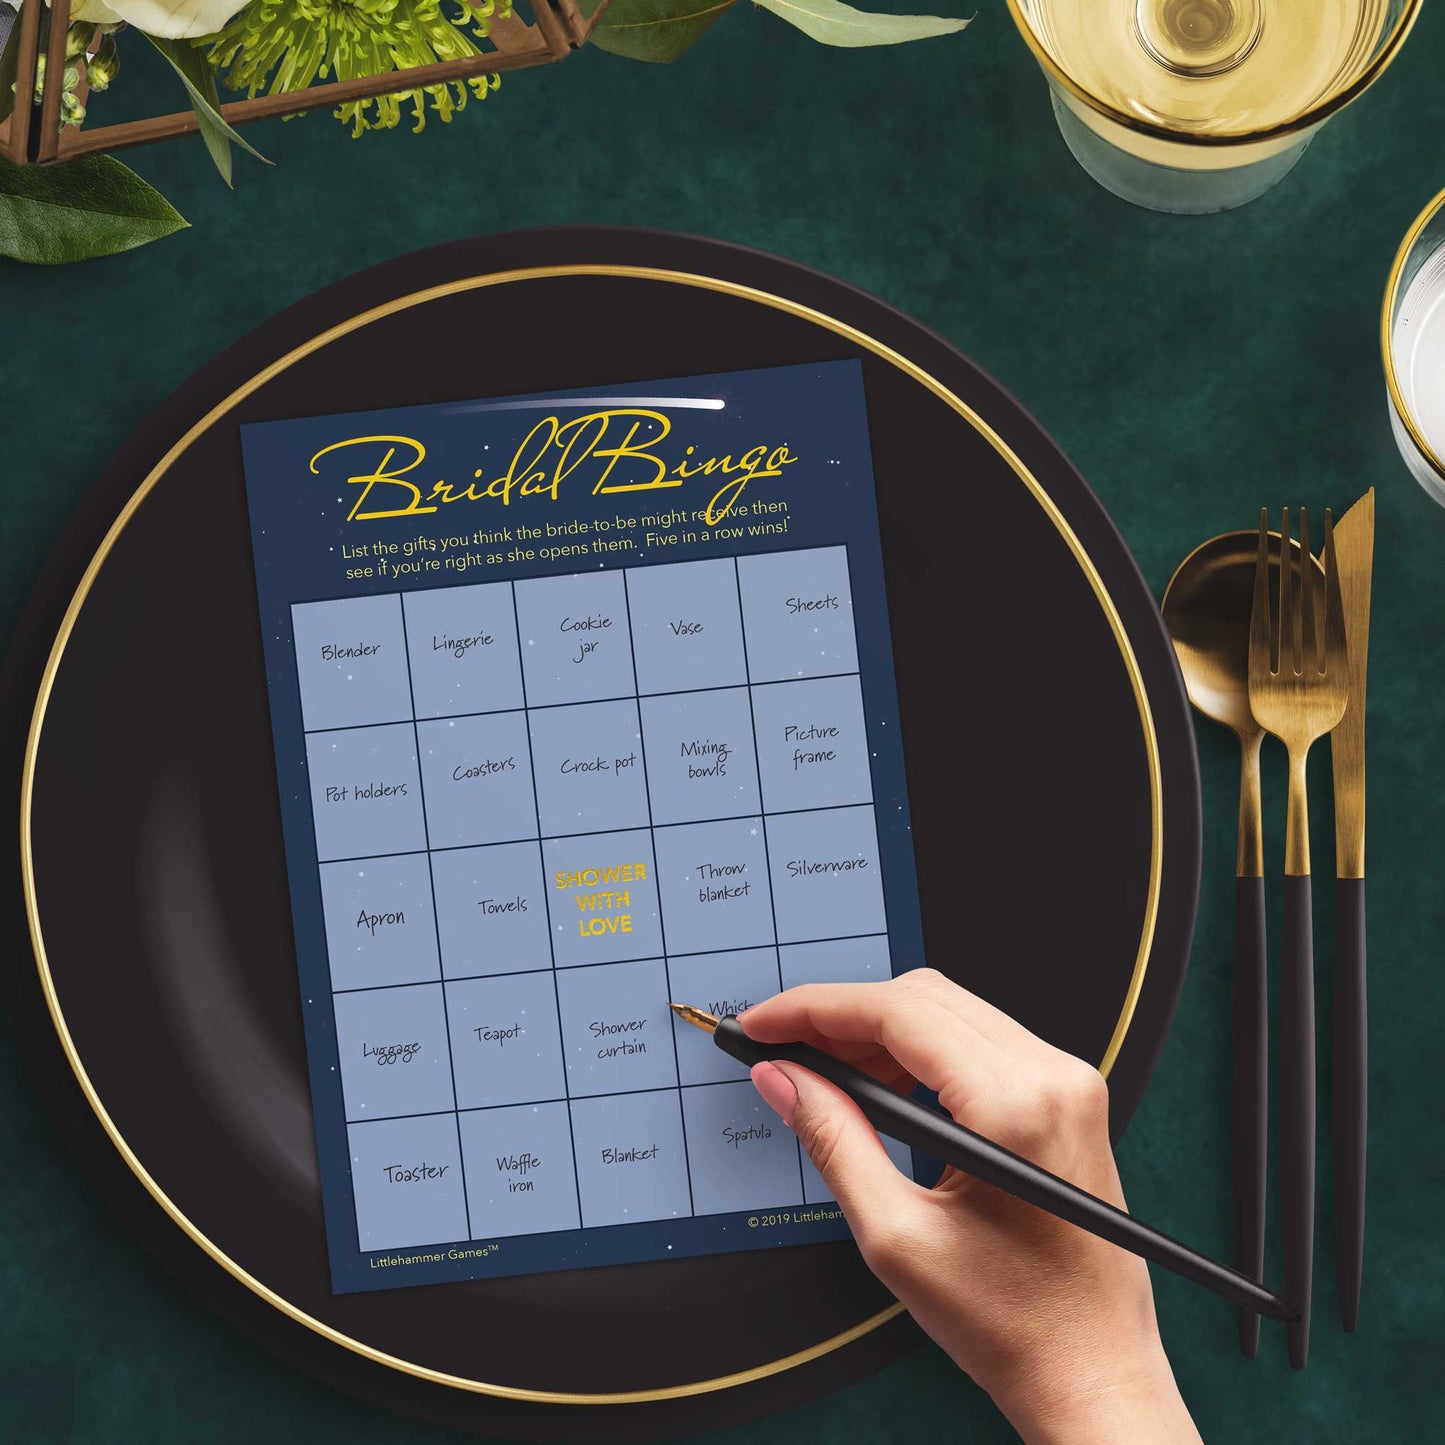 Woman with a pen sitting at a dark place setting with a black and gold plate filling out a celestial-themed Bridal Gift Bingo card